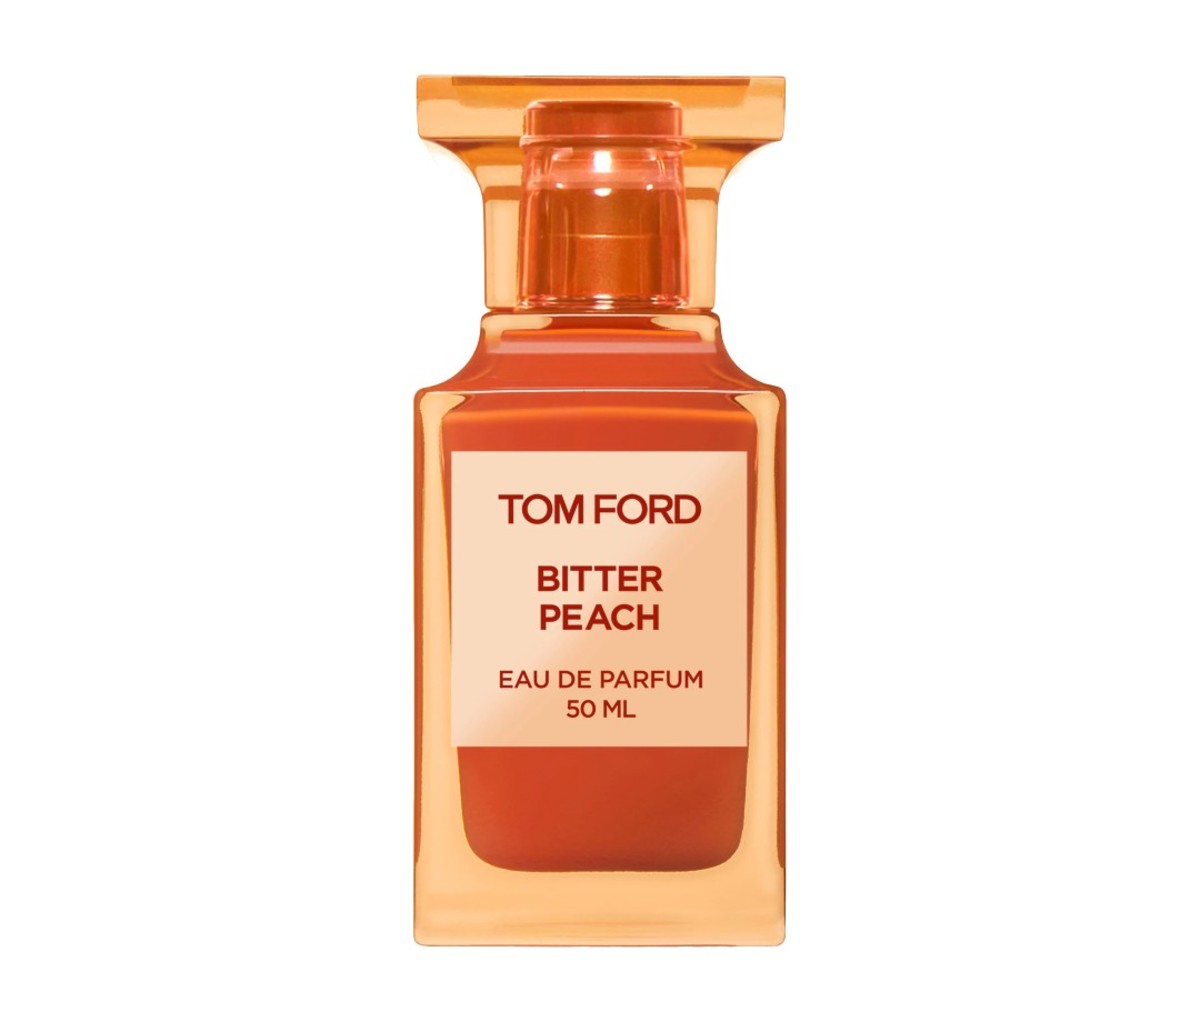 Tom Ford’s Bitter Peach Cologne